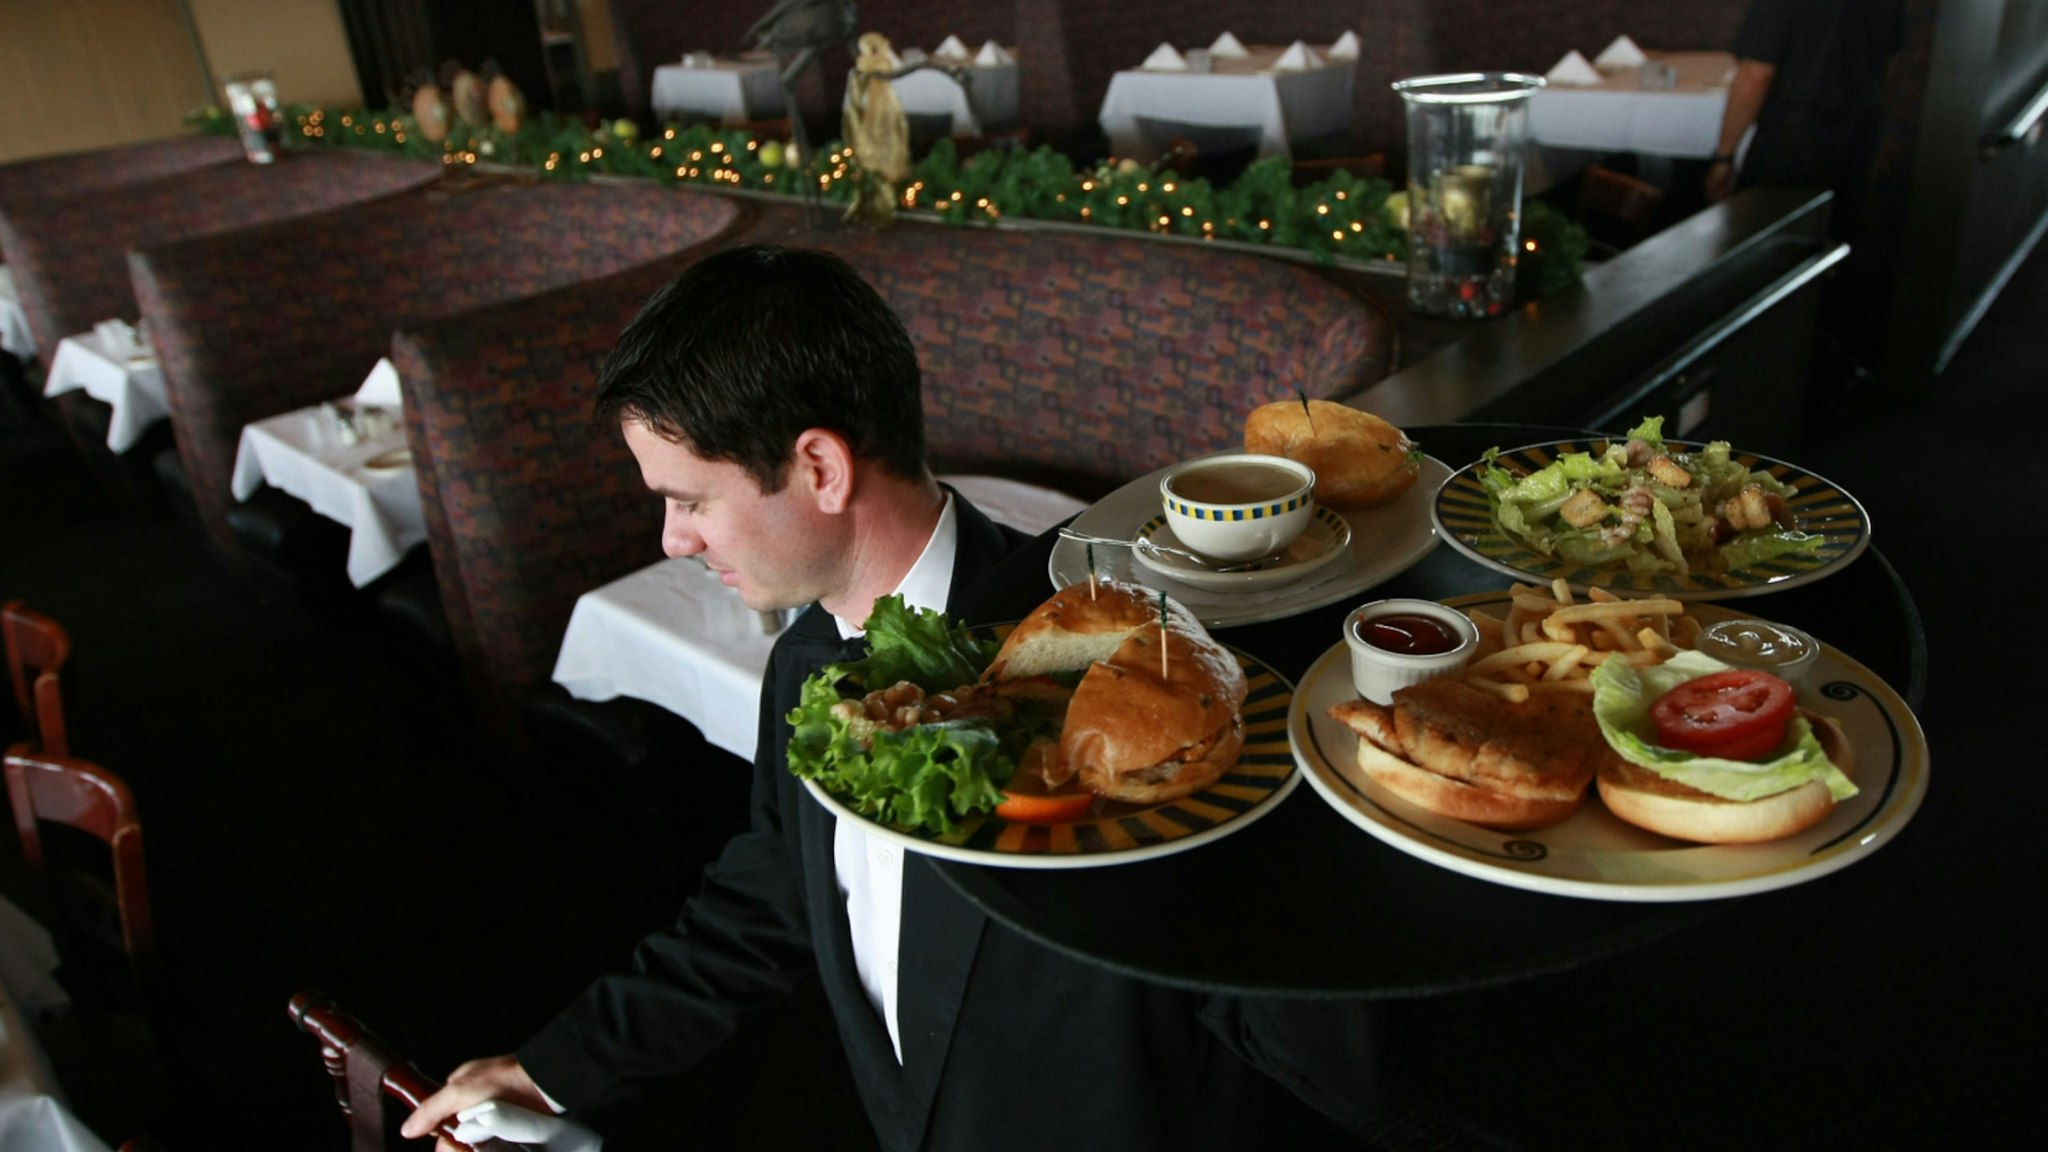 Waiter Alexander Alioto prepares to serve lunch to customers at Alioto's Seafood Restaurant December 3, 2008 in San Francisco, California.